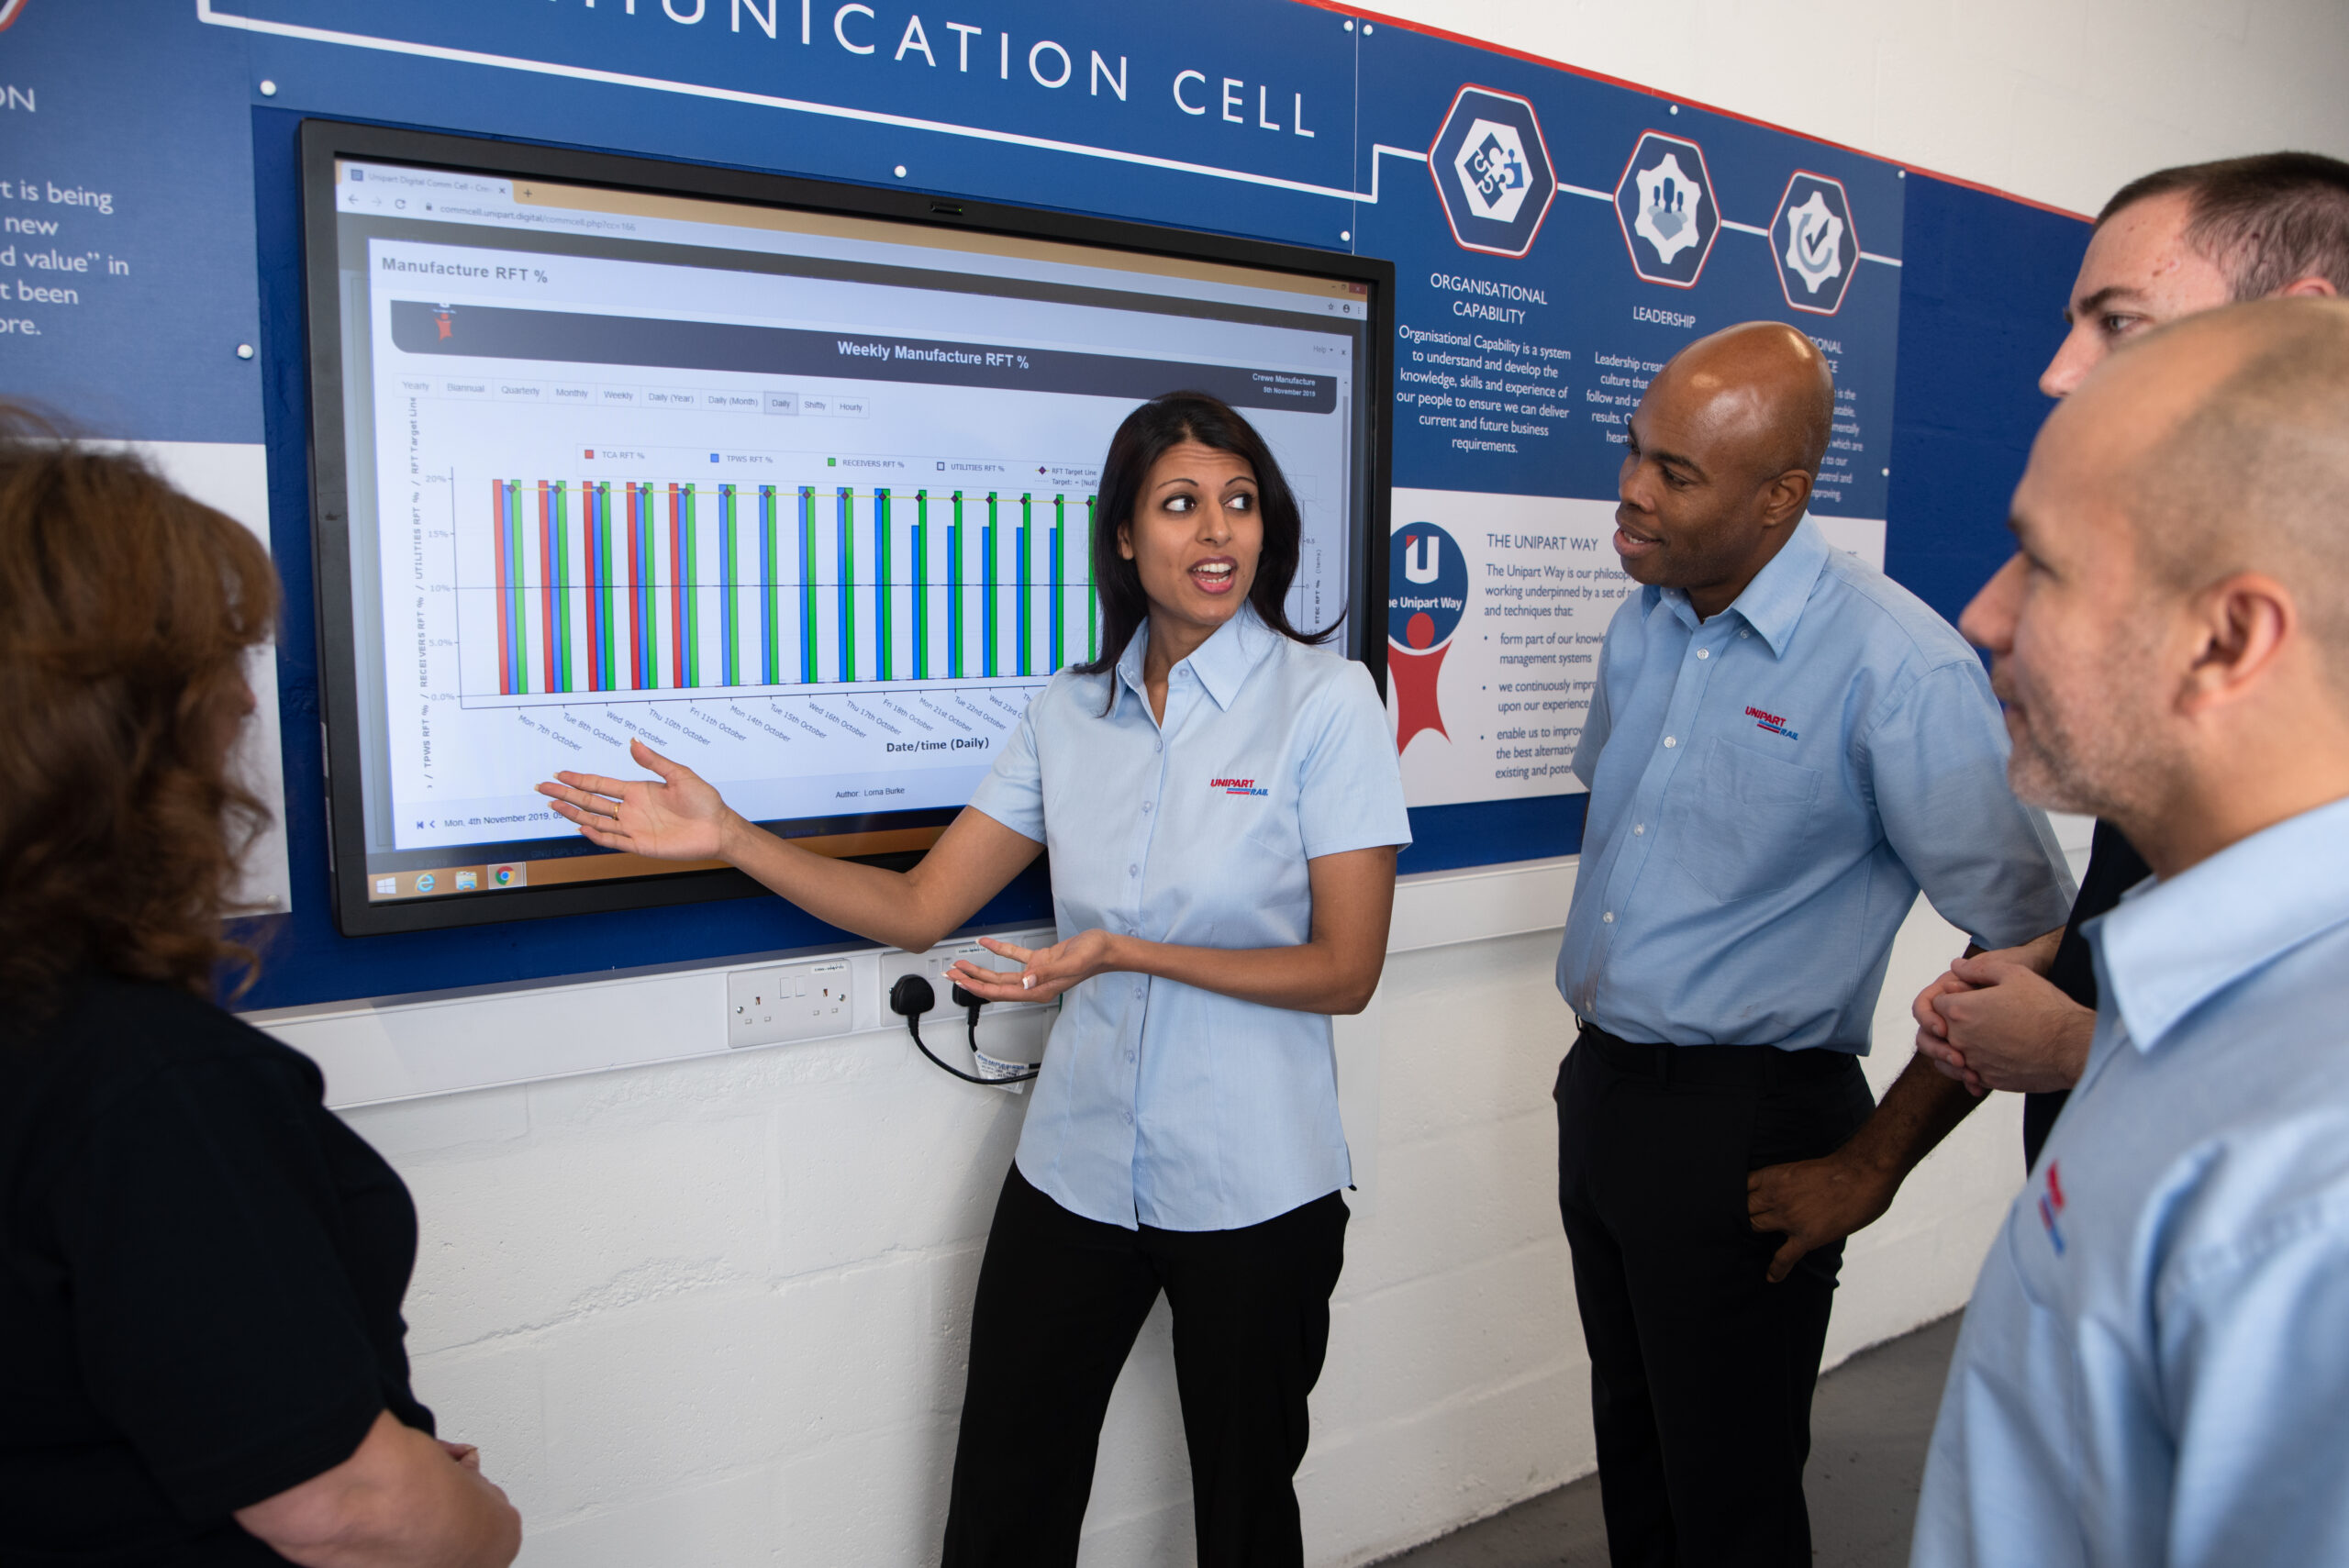 Unipart colleagues working together at a digital communications cell